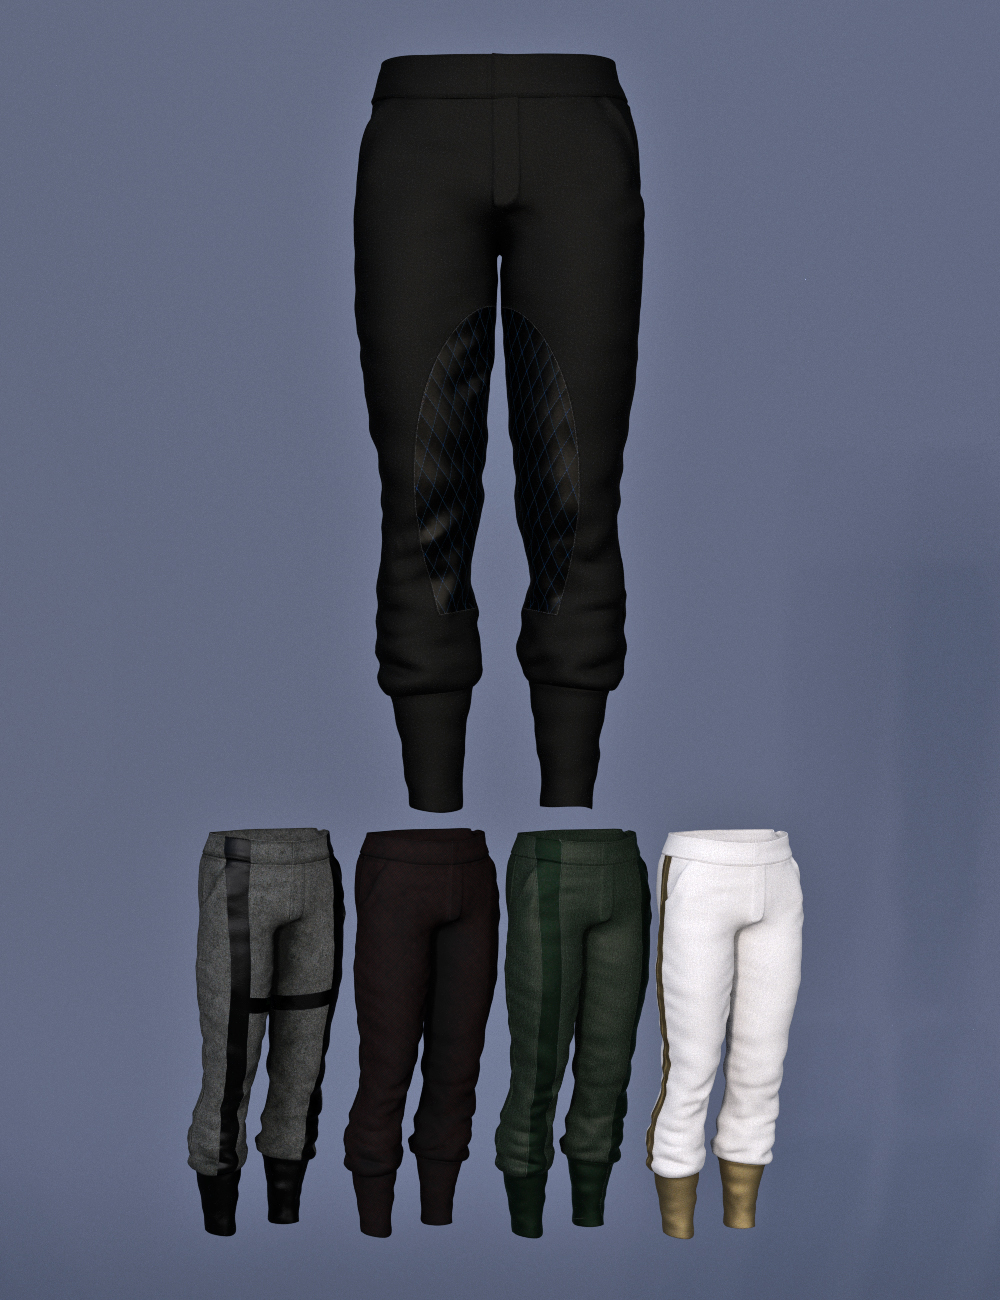 Futuristic Formal Outfit Pants for Genesis 8 and 8.1 Males by: Barbara BrundonUmblefuglyAnna Benjamin, 3D Models by Daz 3D